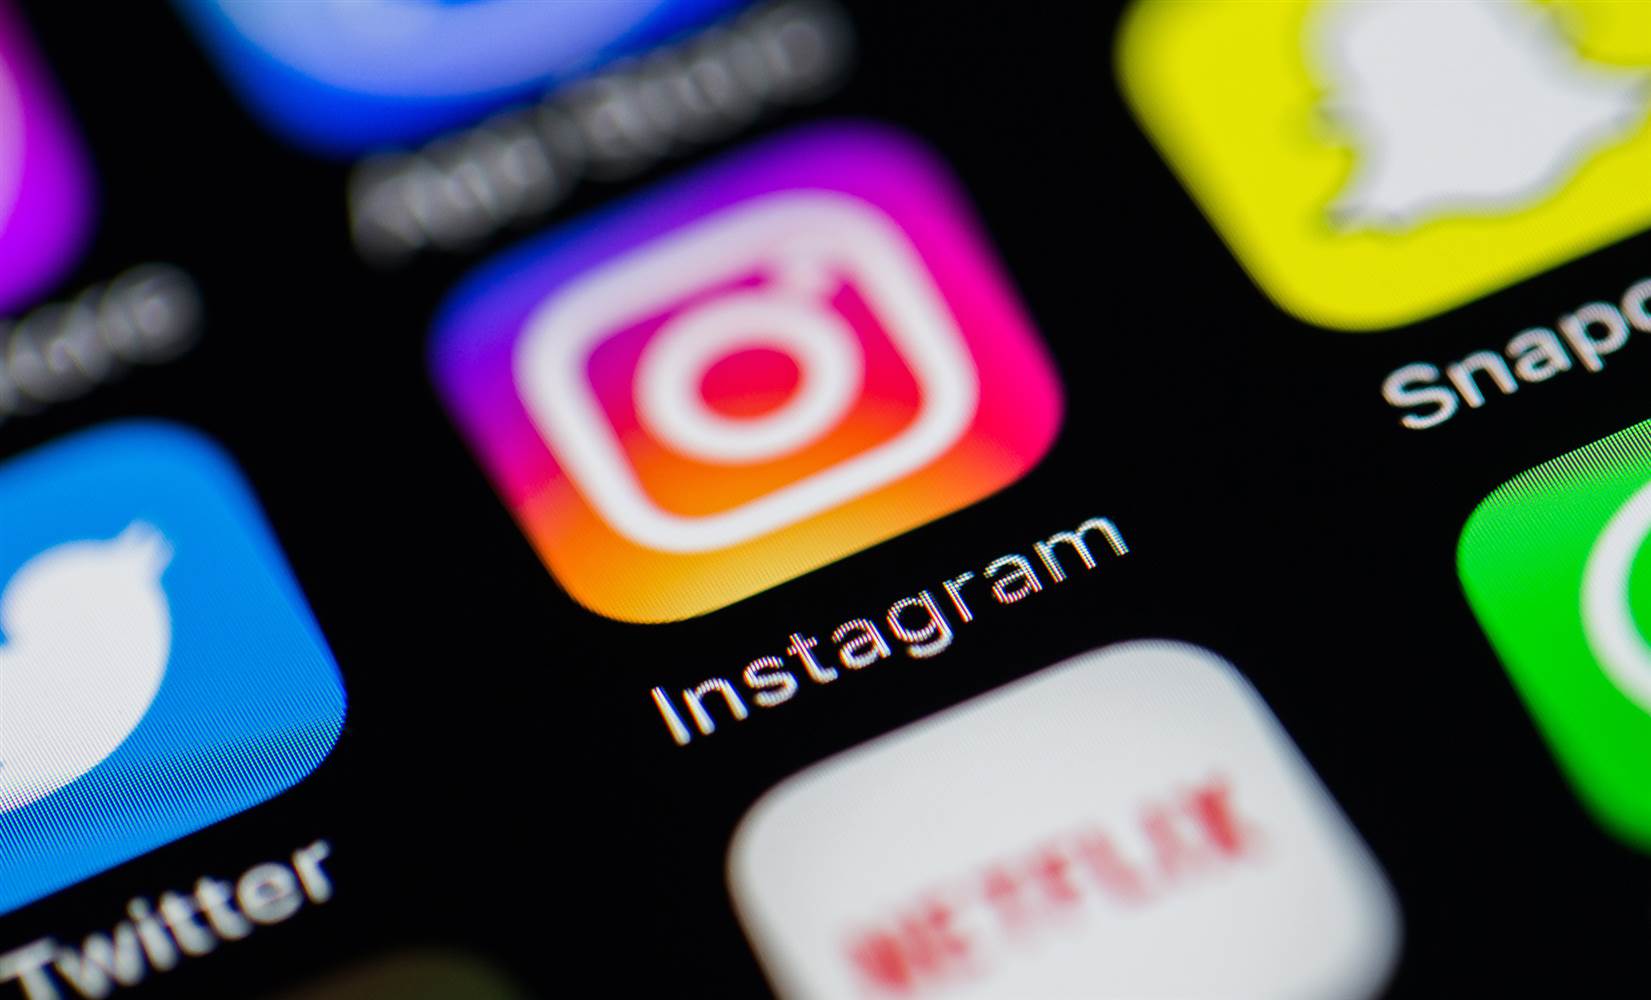 How to hack Instagram without touching the victim's phone